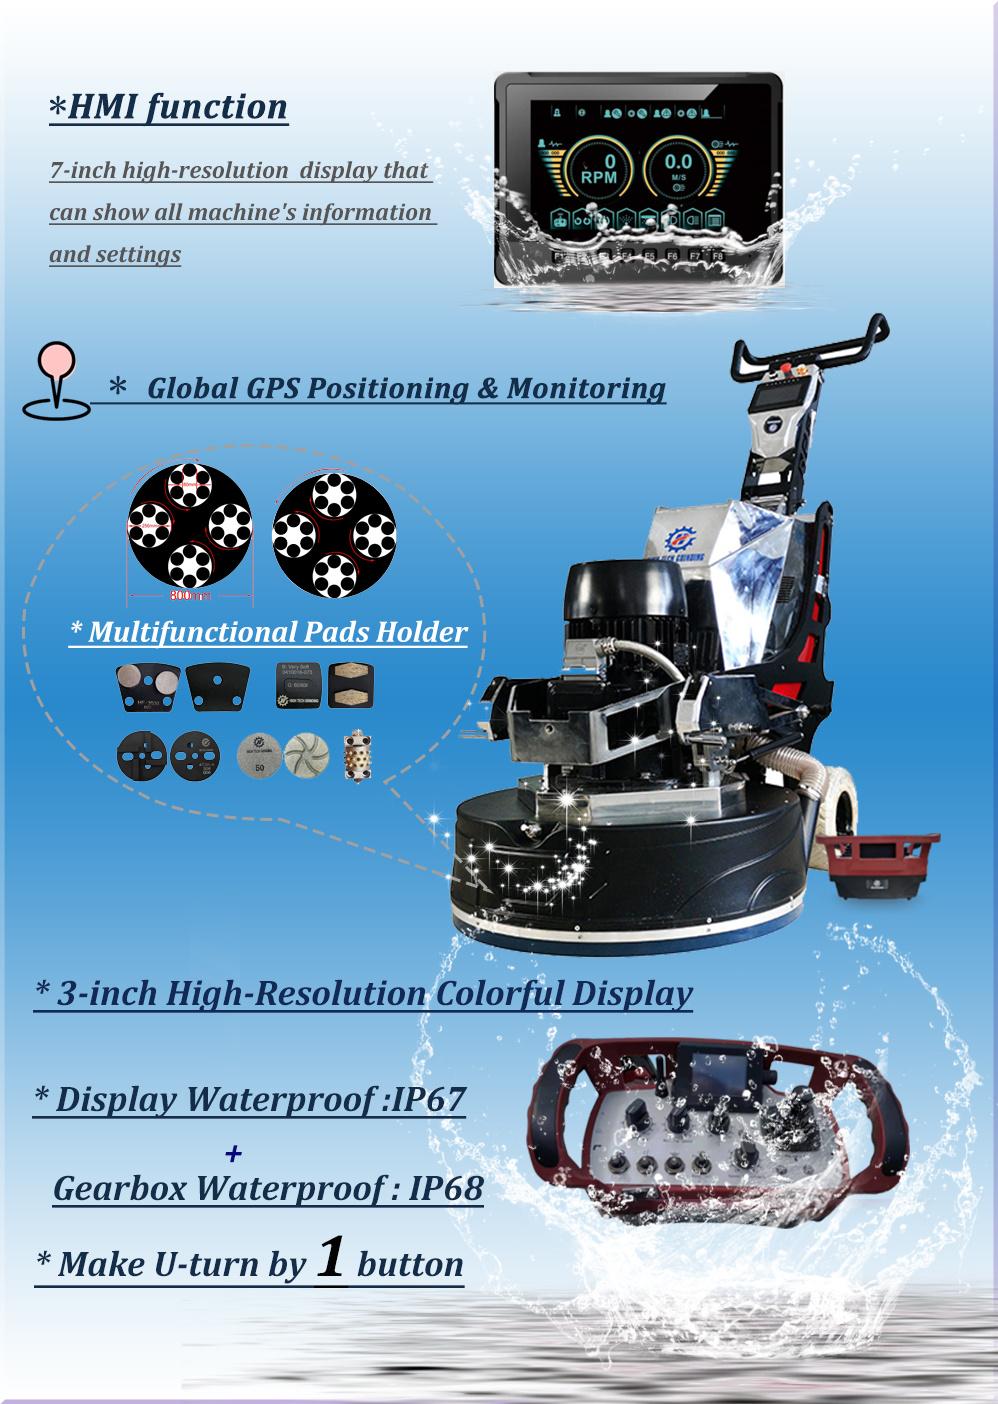 Robert Remote Control Floor Polisher Machine Automatic Walking Without Manual Propulsion Floor Grinder